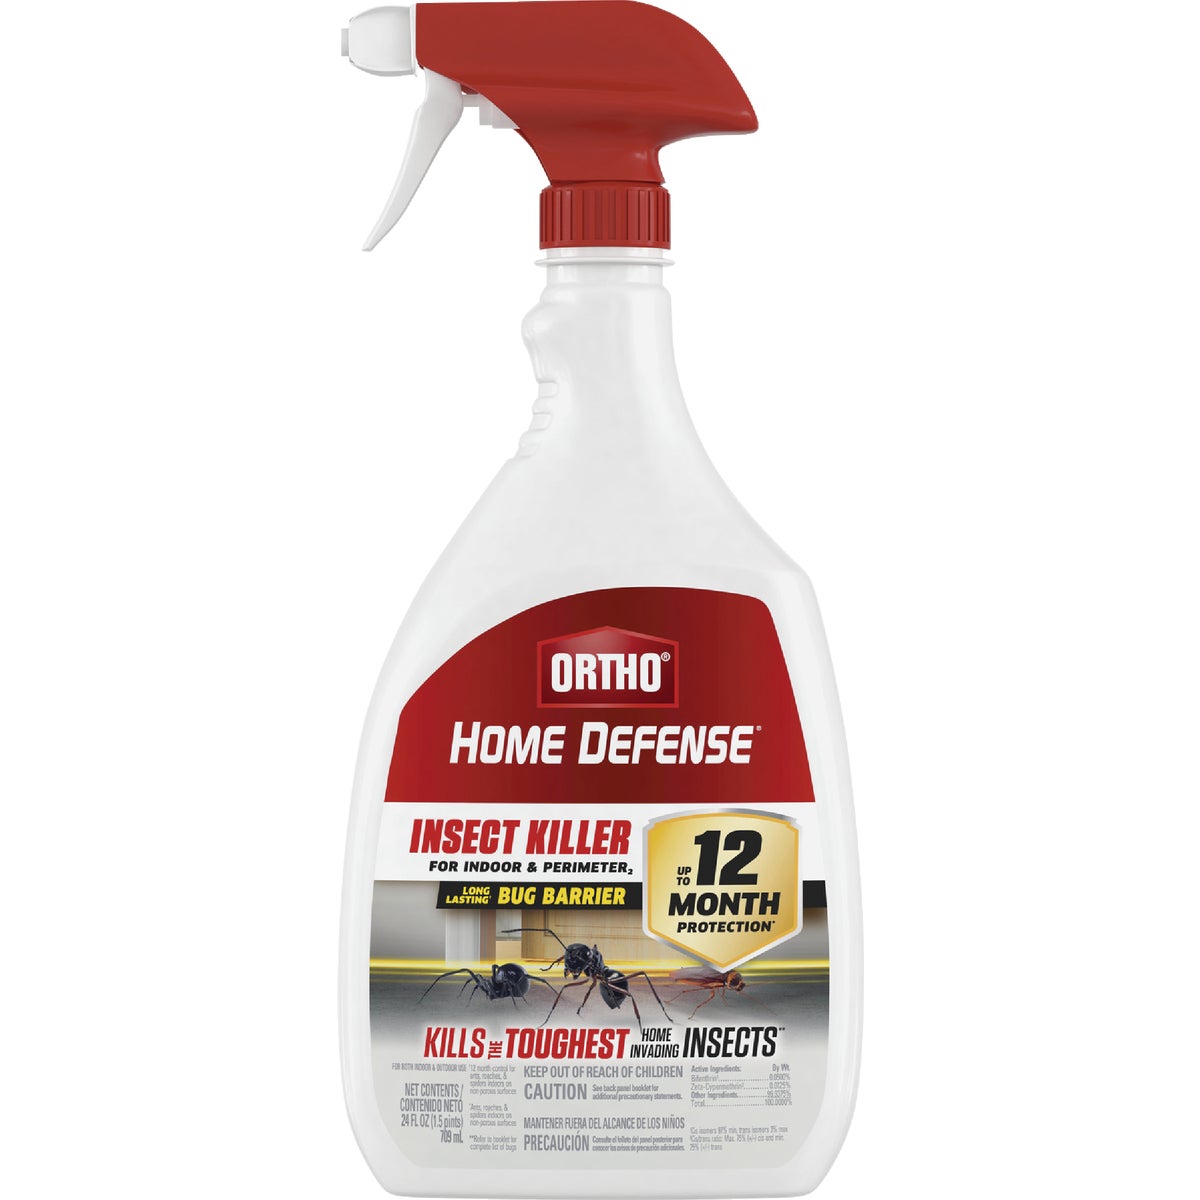 Ortho Home Defense 24 Oz. Ready To Use Trigger Spray Indoor & Perimeter Insect Killer